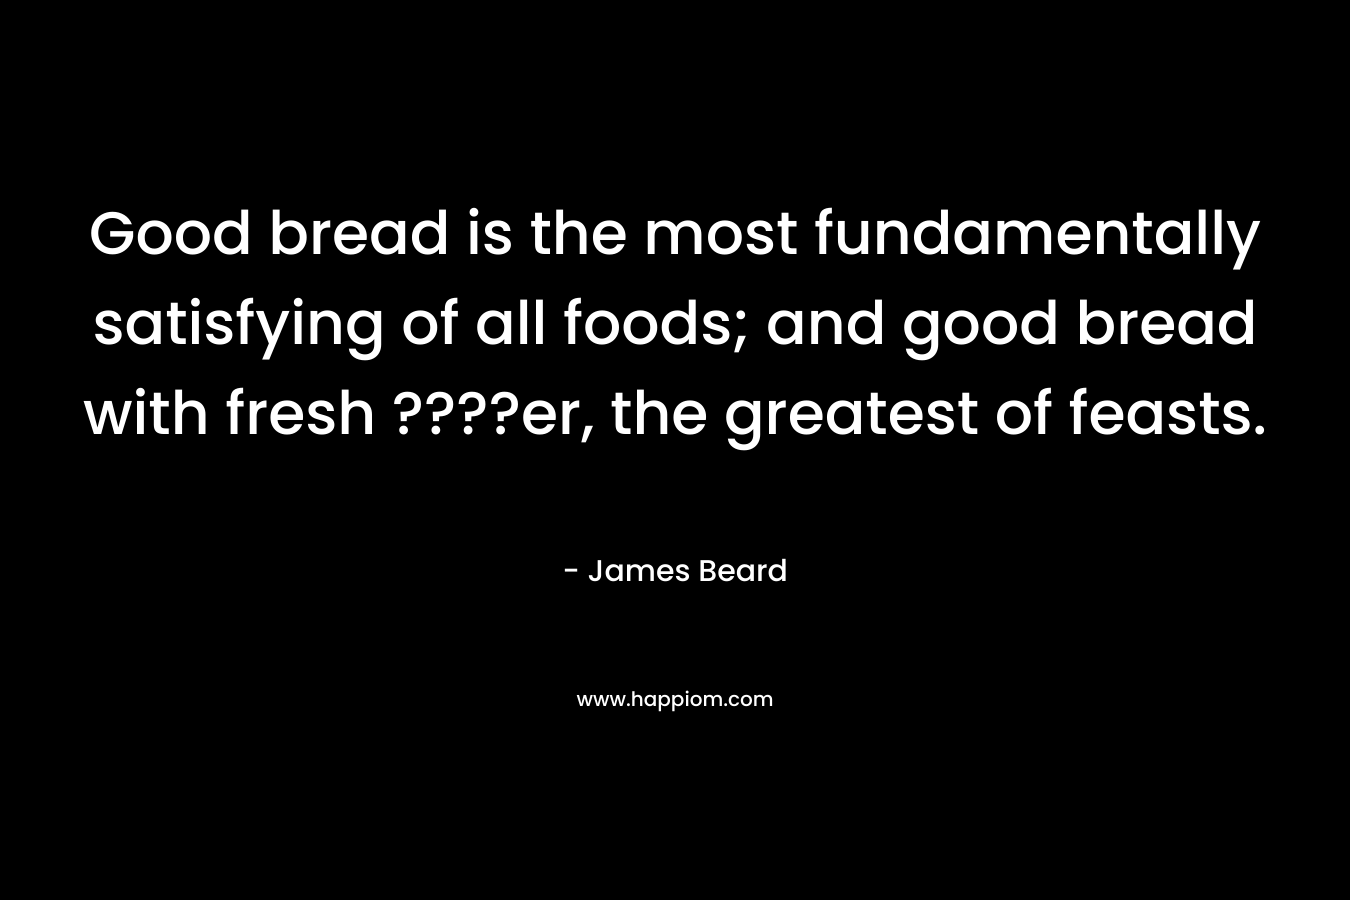 Good bread is the most fundamentally satisfying of all foods; and good bread with fresh ????er, the greatest of feasts. – James Beard